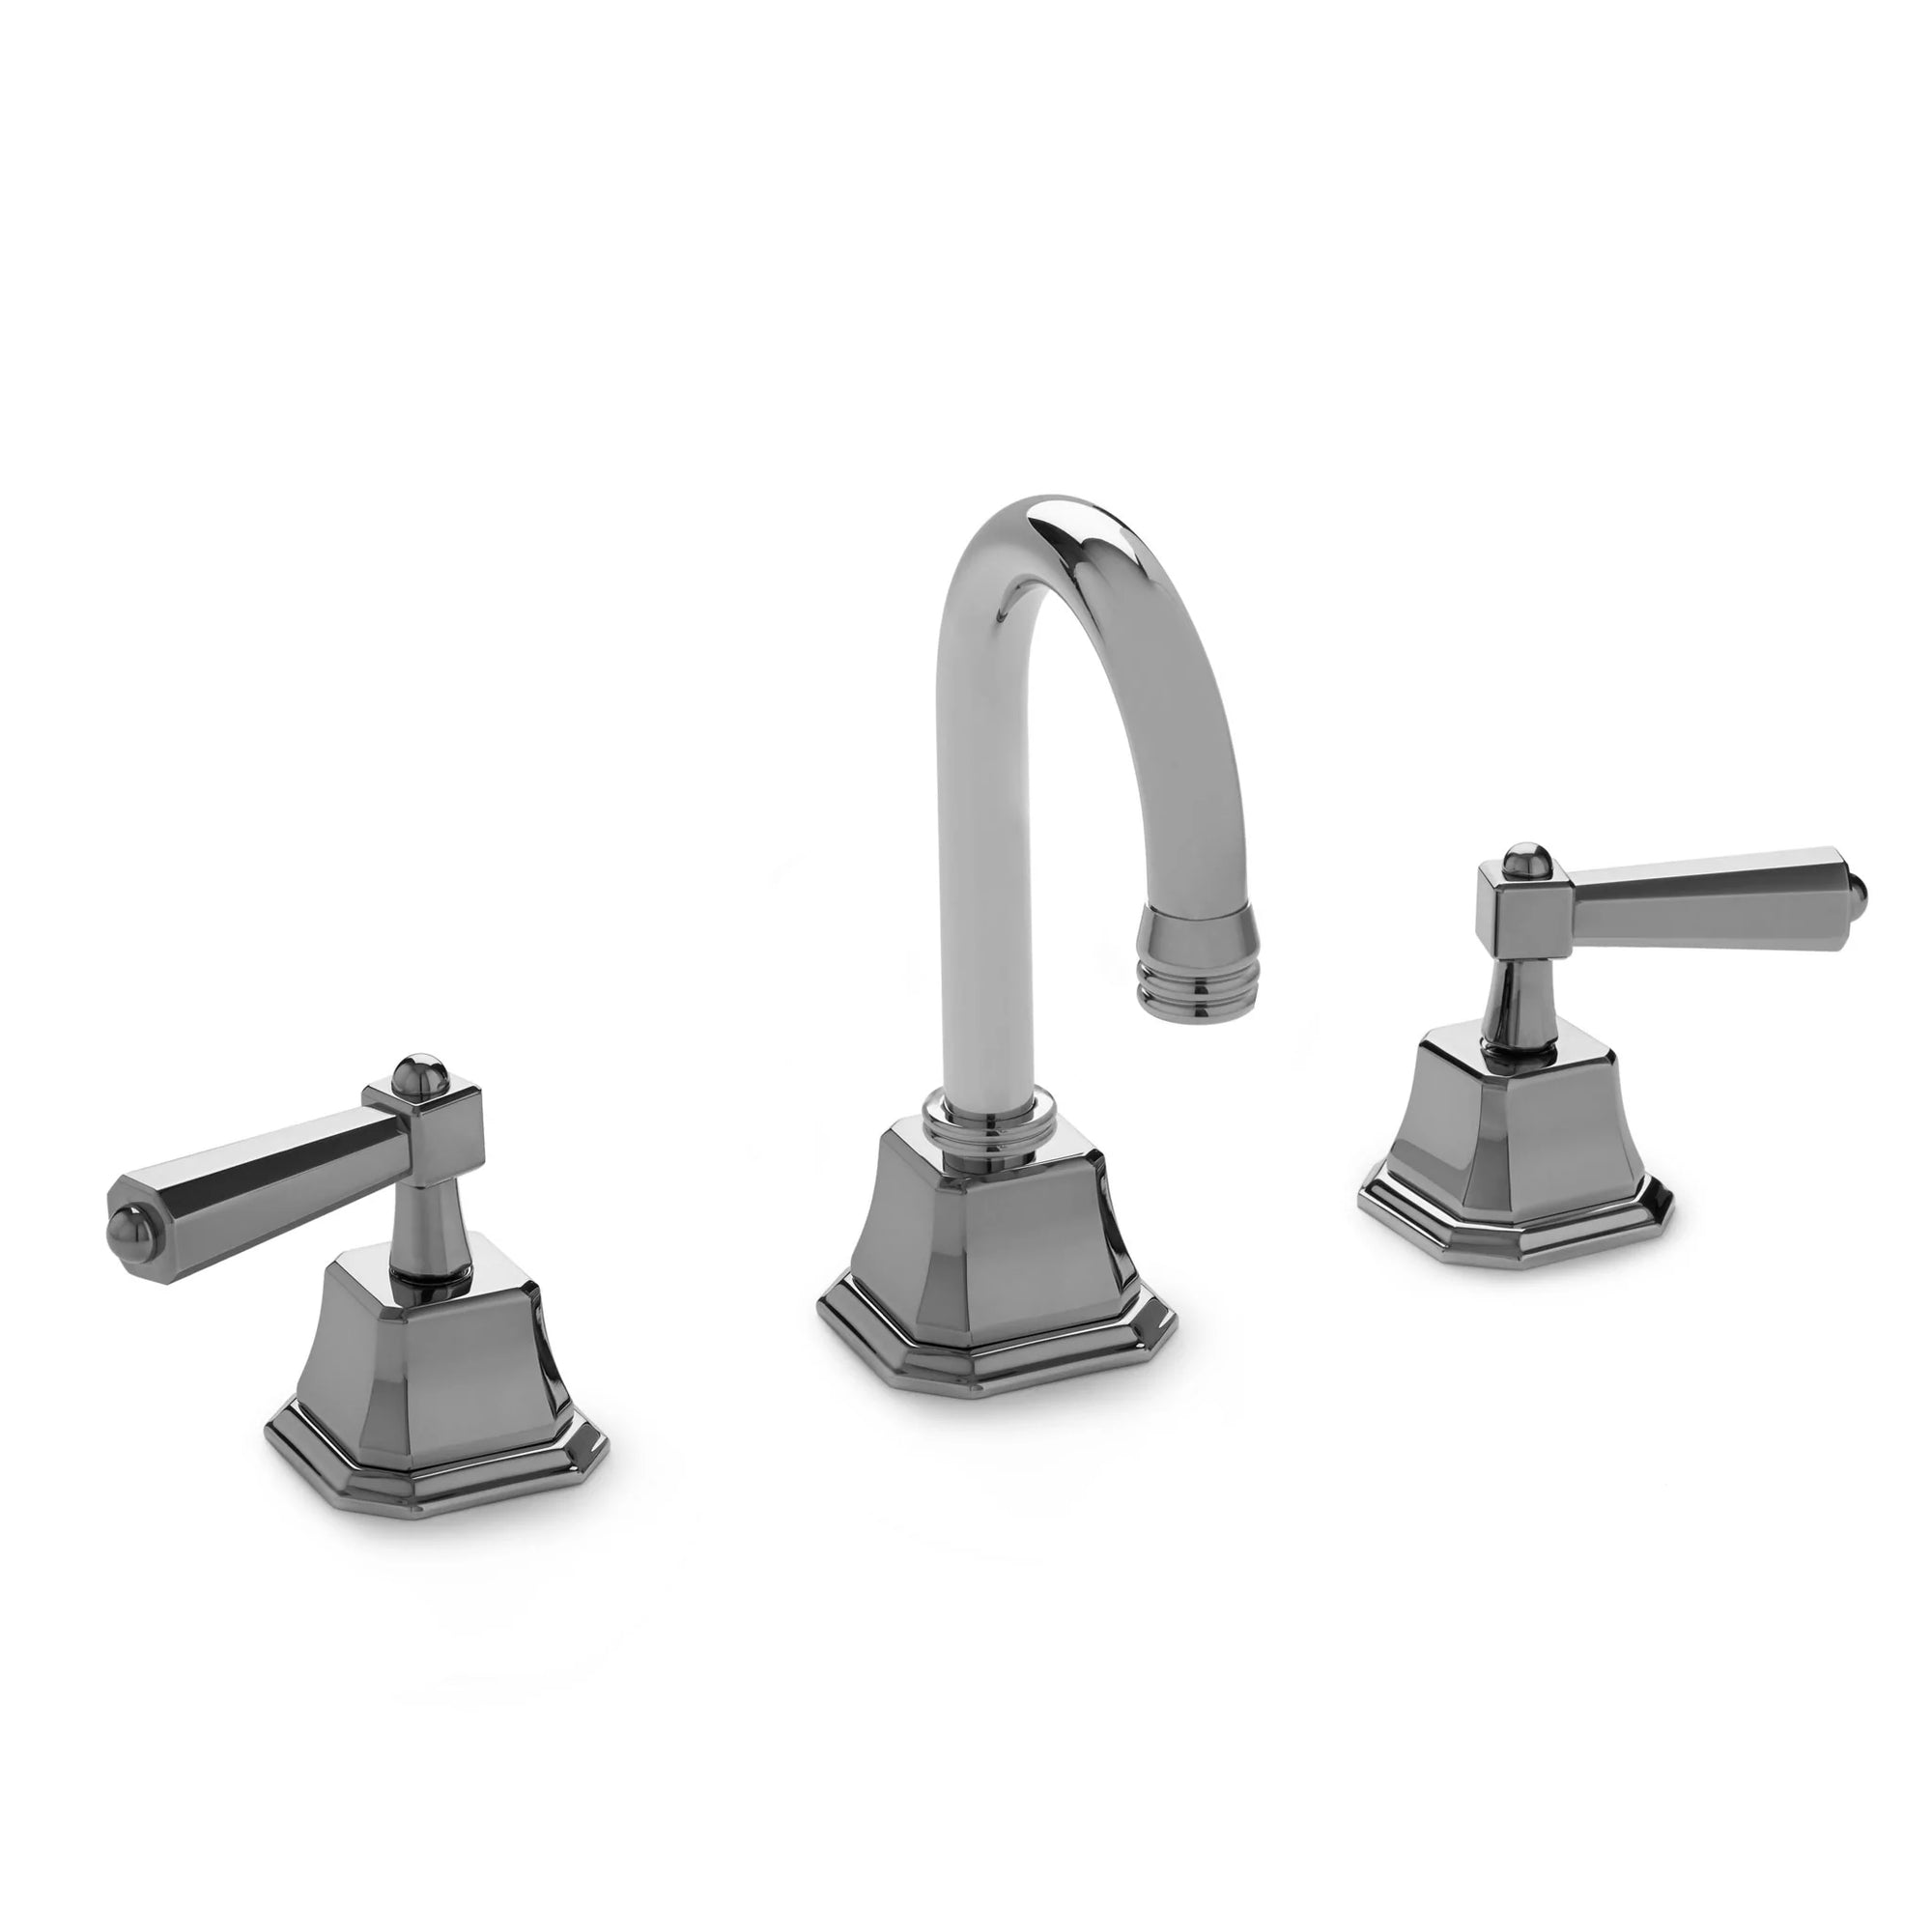 0980BAR800HR-CP Sherle Wagner International Arco with Harrison Lever Bar Set in Polished Chrome metal finish